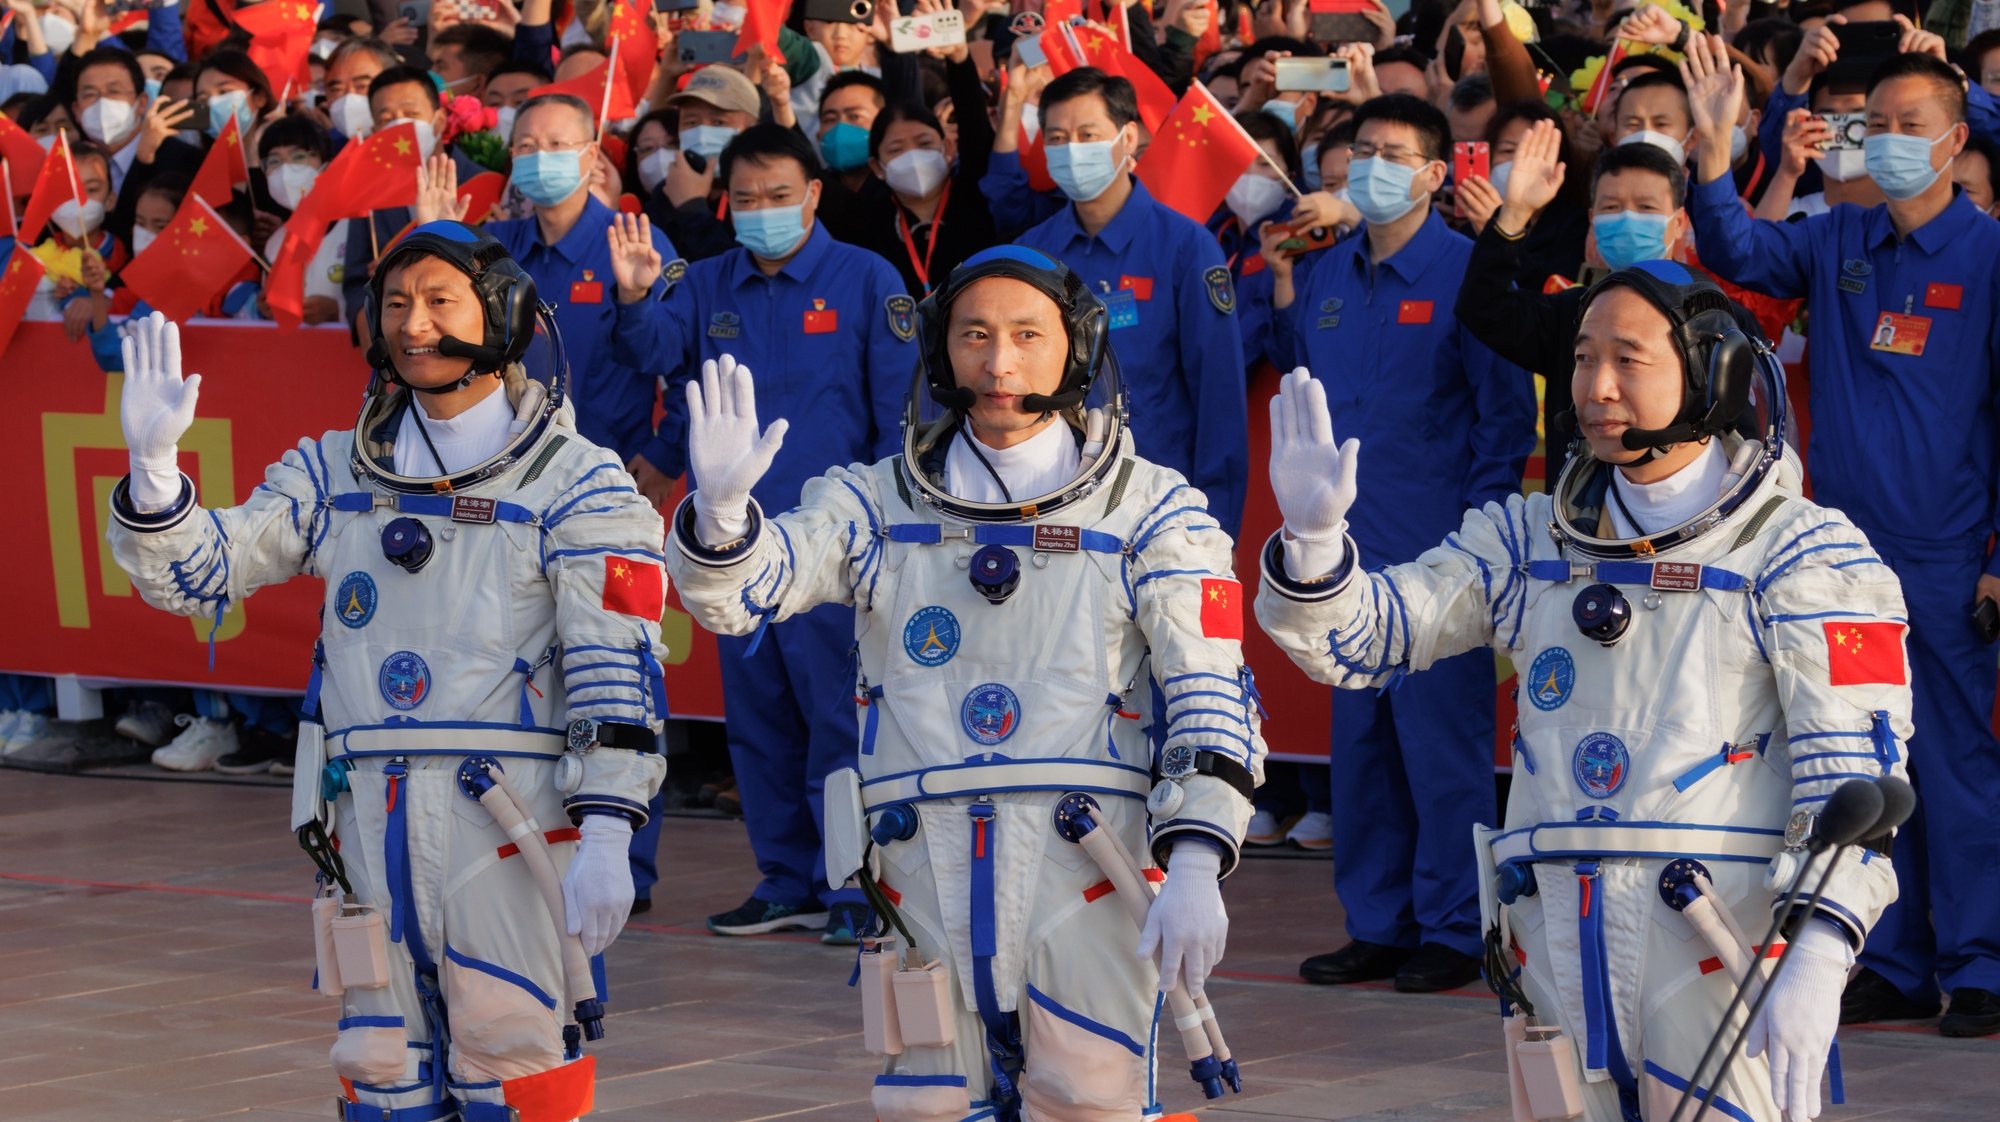 epa10662661 (L-R) Payload expert Gui Haichao, space flight engineer Zhu Yangzhu, and commander Jing Haipeng wave during the seeing-off ceremony before boarding for the launch of the Long March-2F carrier rocket with a Shenzhou-16 manned space flight at the Jiuquan Satellite Launch Centre, in Jiuquan, Gansu province, China, 30 May 2023. The Shenzhou-16 manned space flight mission will transport three Chinese astronauts to the Tiangong space station.  EPA/ALEX PLAVEVSKI